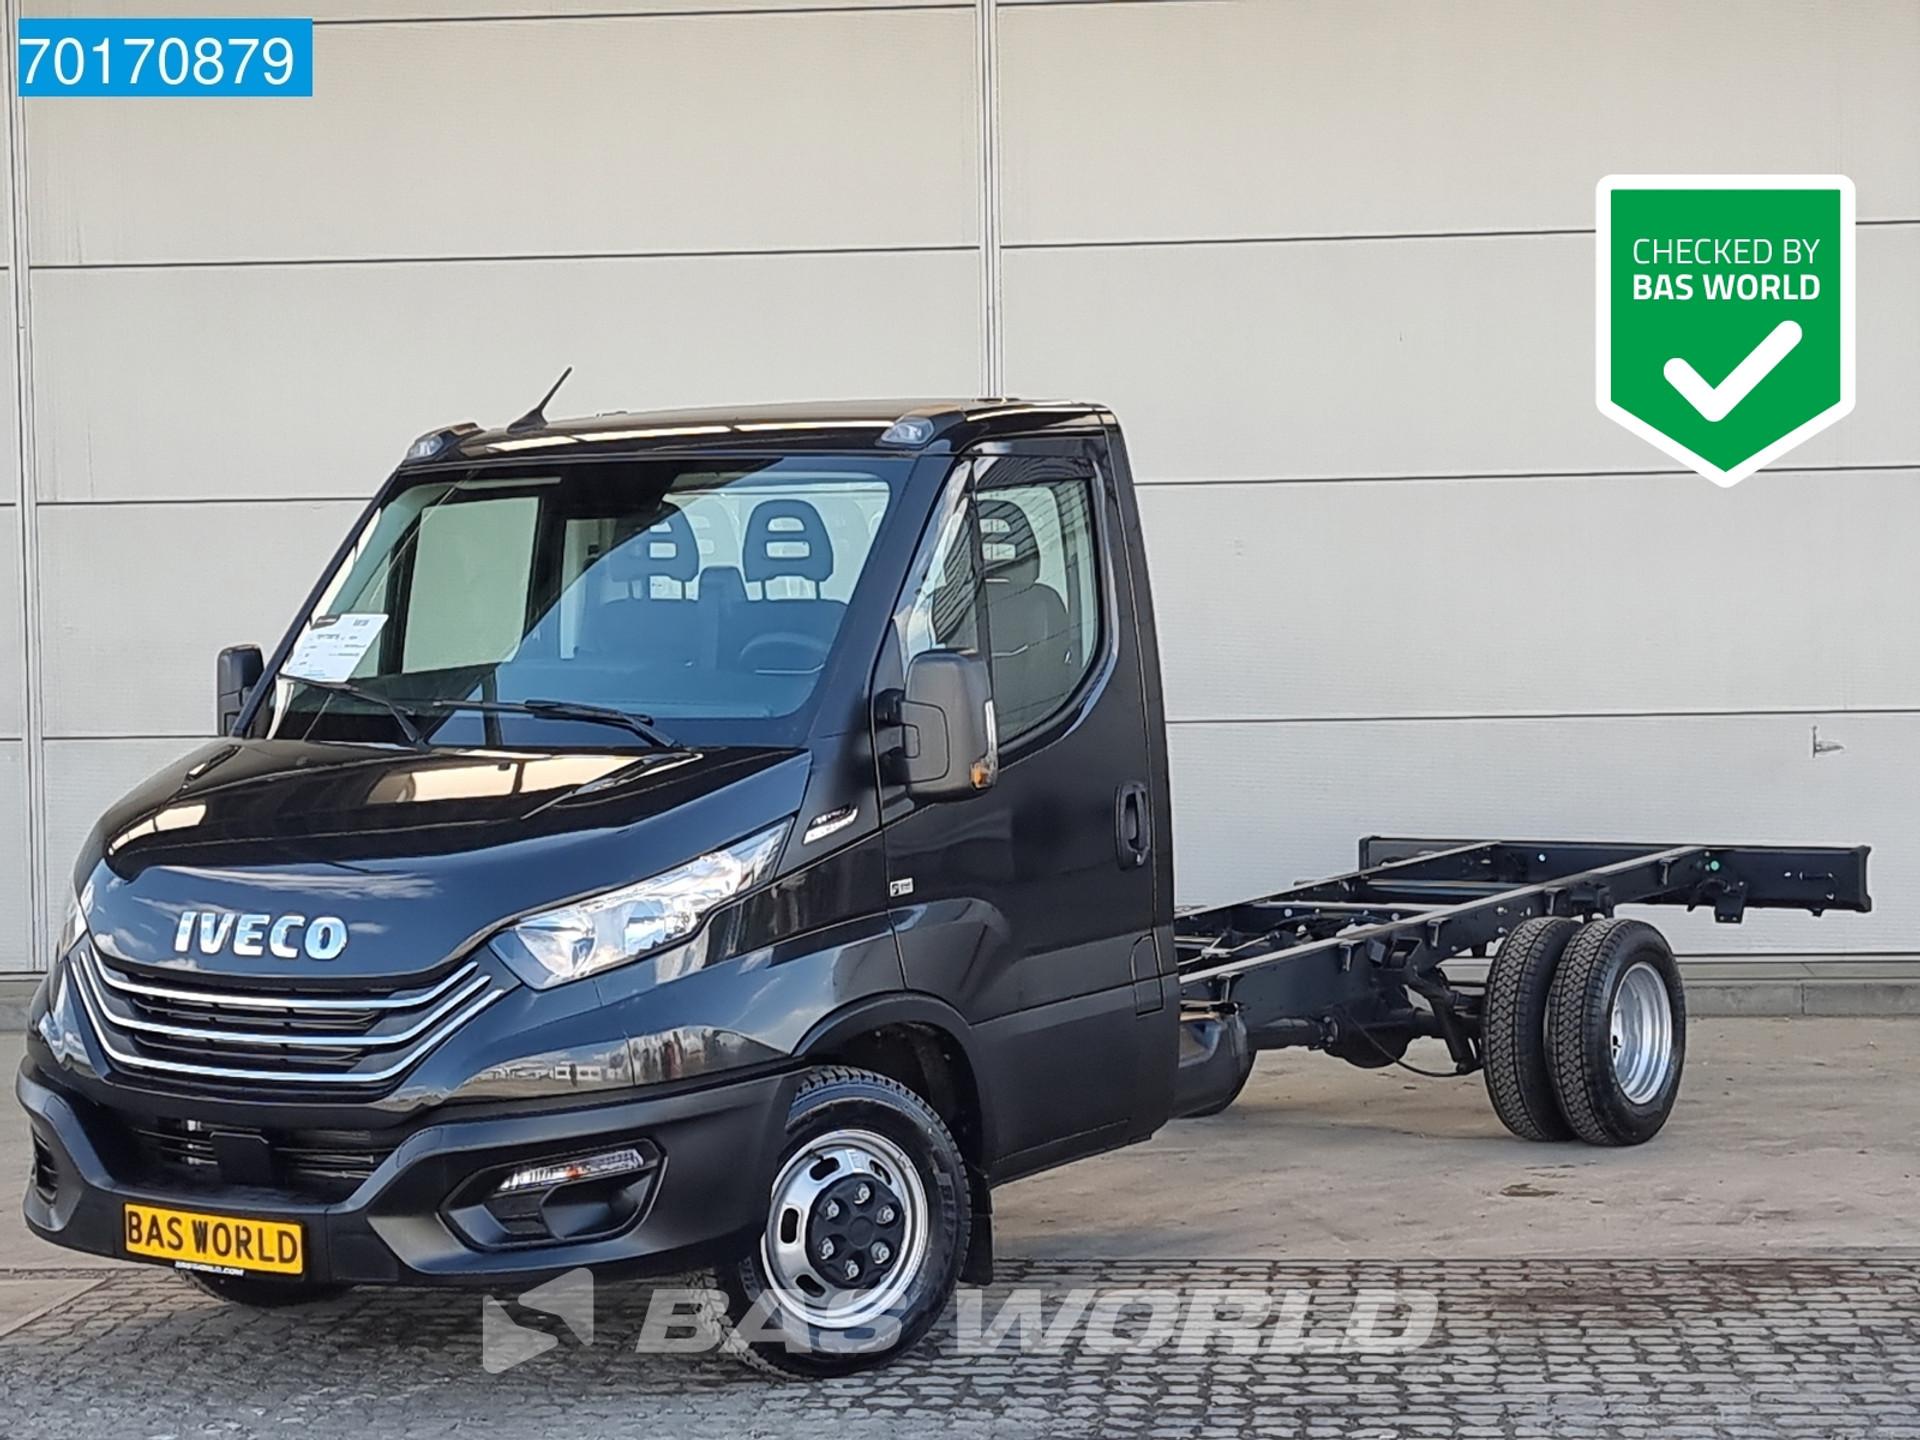 Foto 1 van Iveco Daily 35C18 3.0L Automaat Navi 4100mm wielbasis Hi Connect Chassis Cabien Pritsche Fahrgestell Airco Cruise control